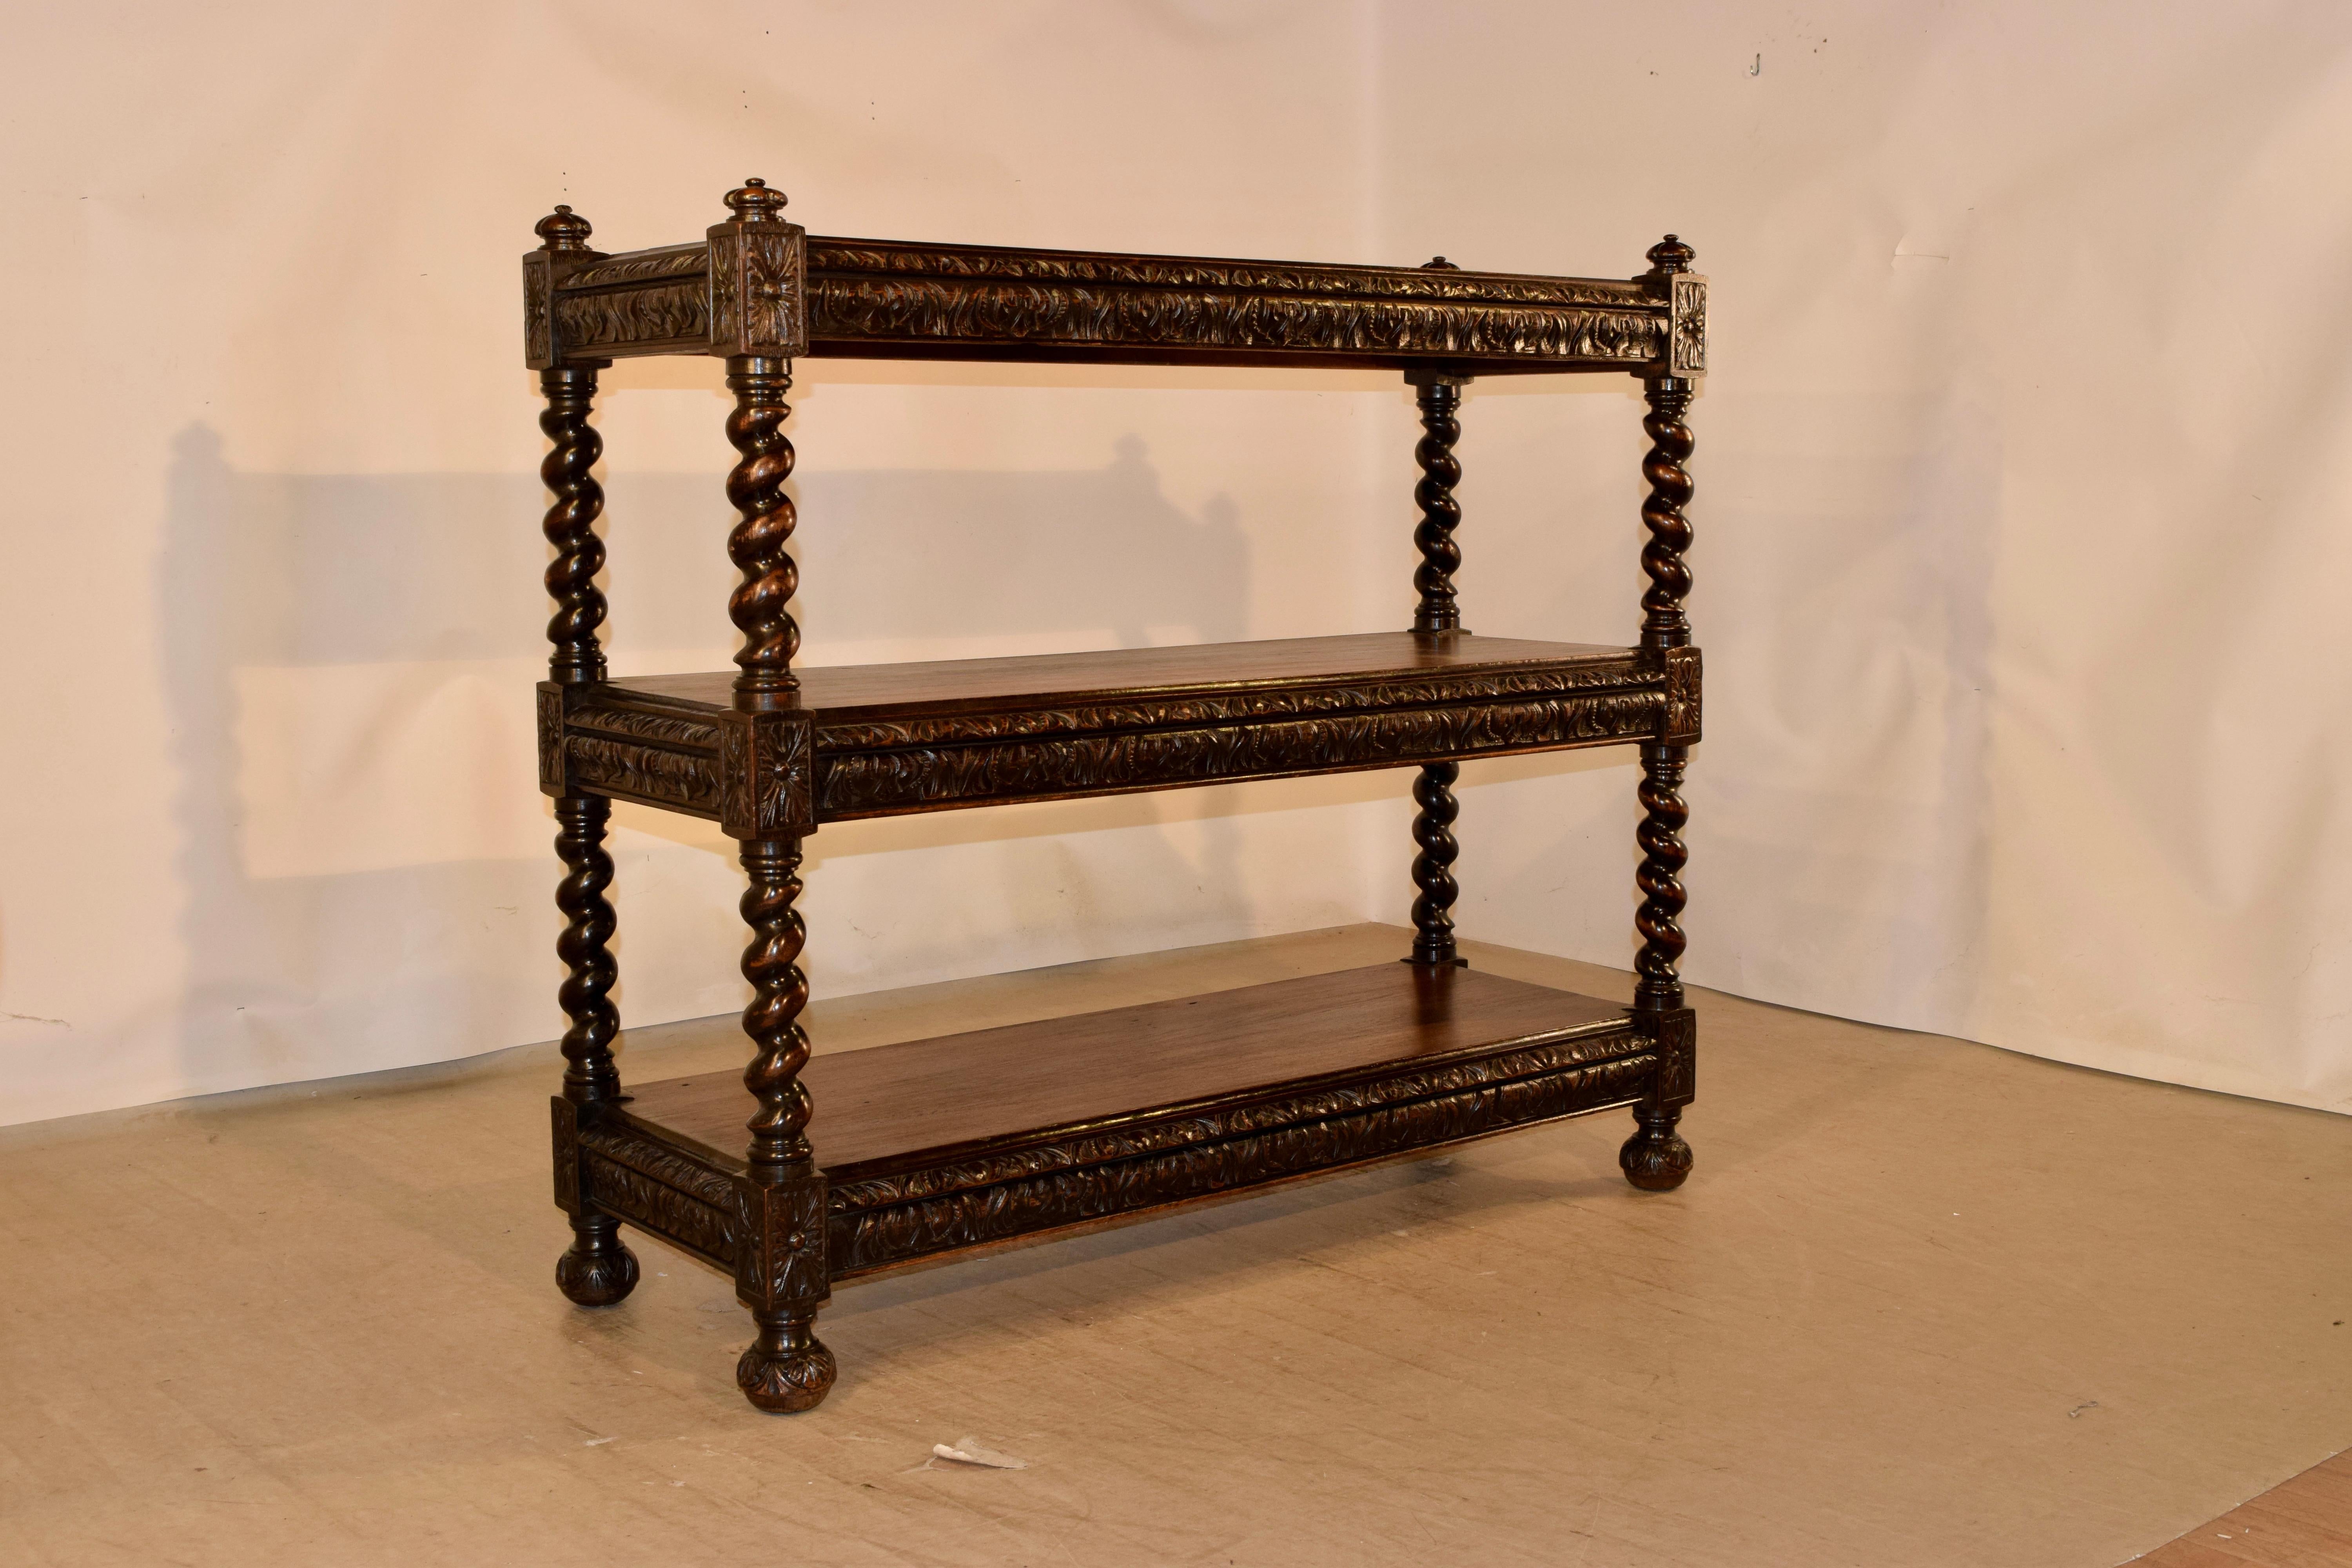 19th century English oak buffet with four hand turned and carved finials at the top over three shelves, all with hand carved and beveled edges over three hand carved aprons, all separated by hand turned barley twist shelf supports. The piece is